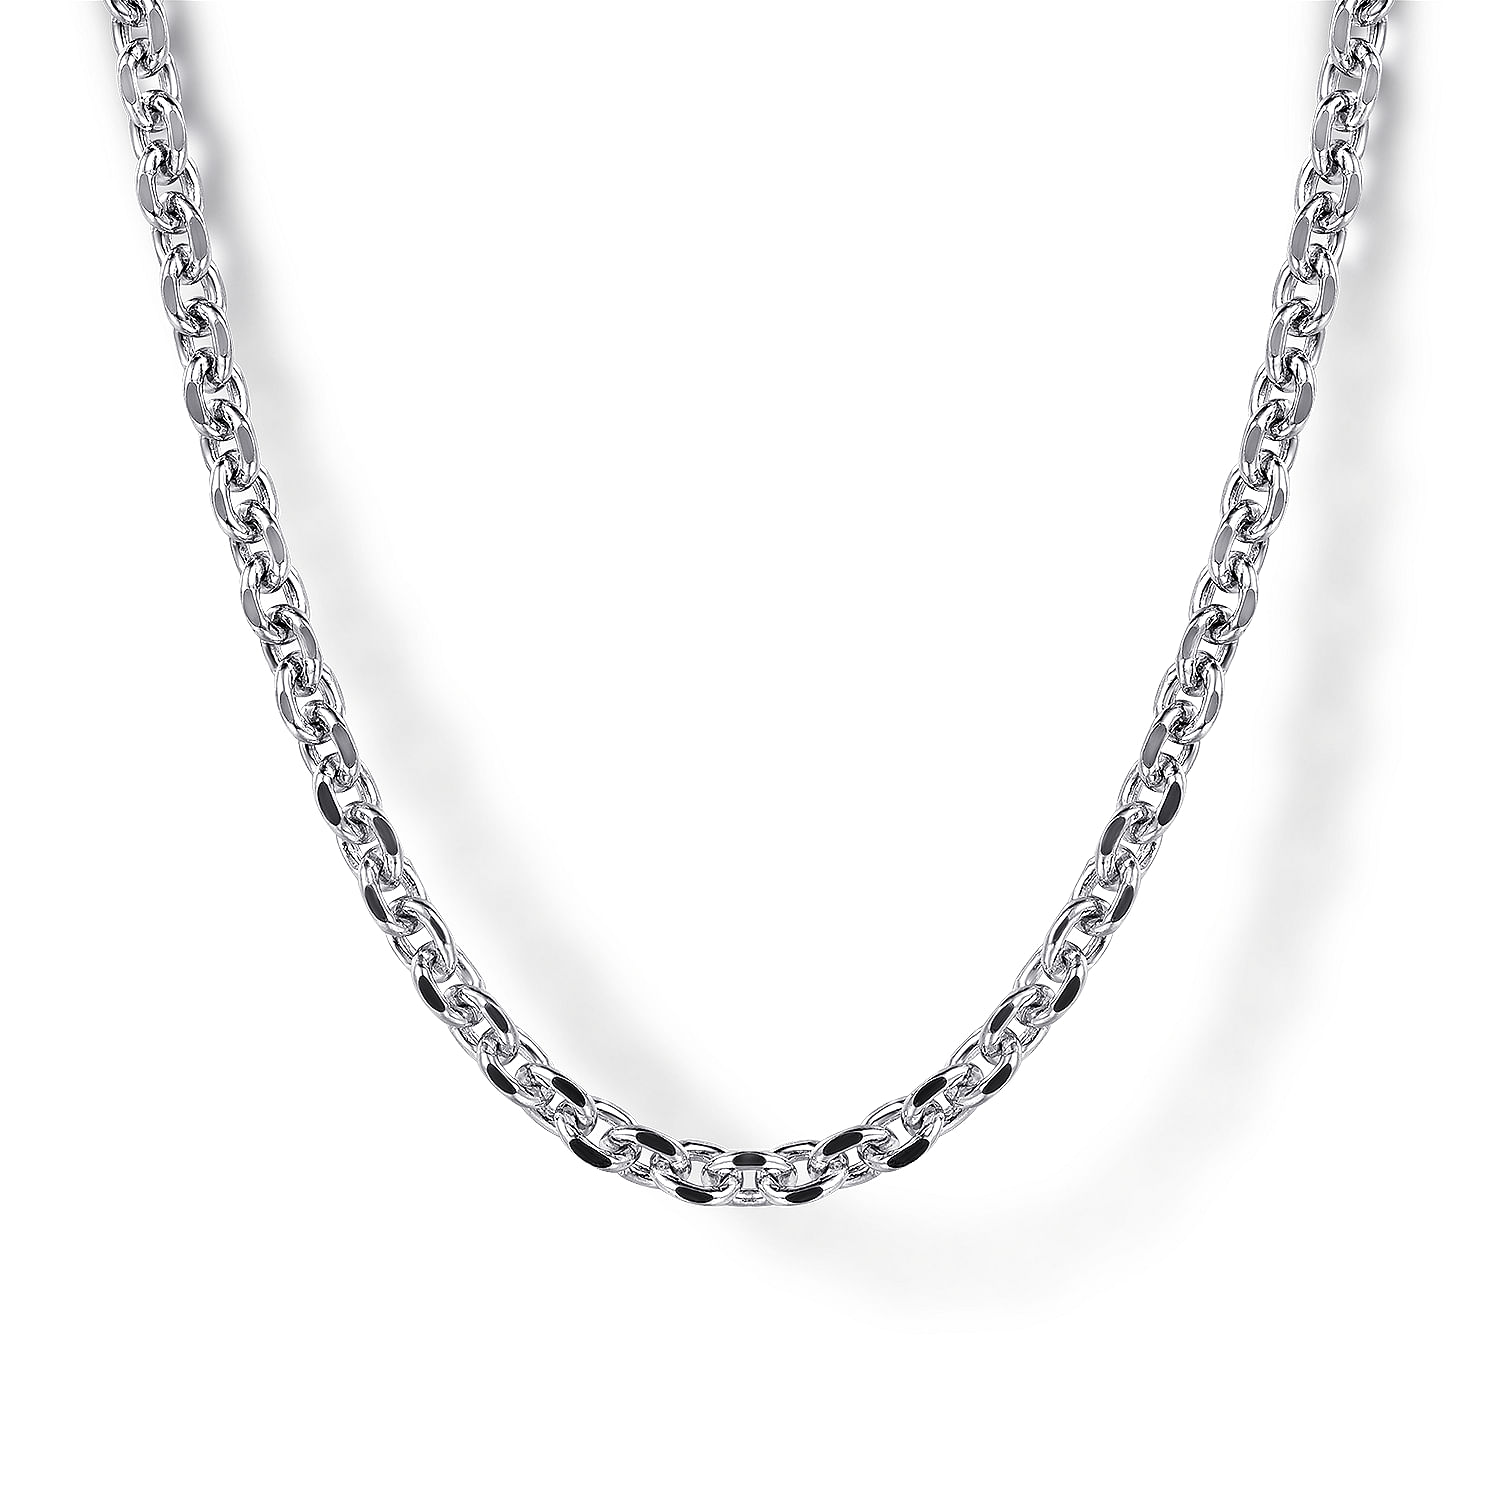 Gabriel - 22 Inch 925 Sterling Silver Solid Men's Link Chain Necklace